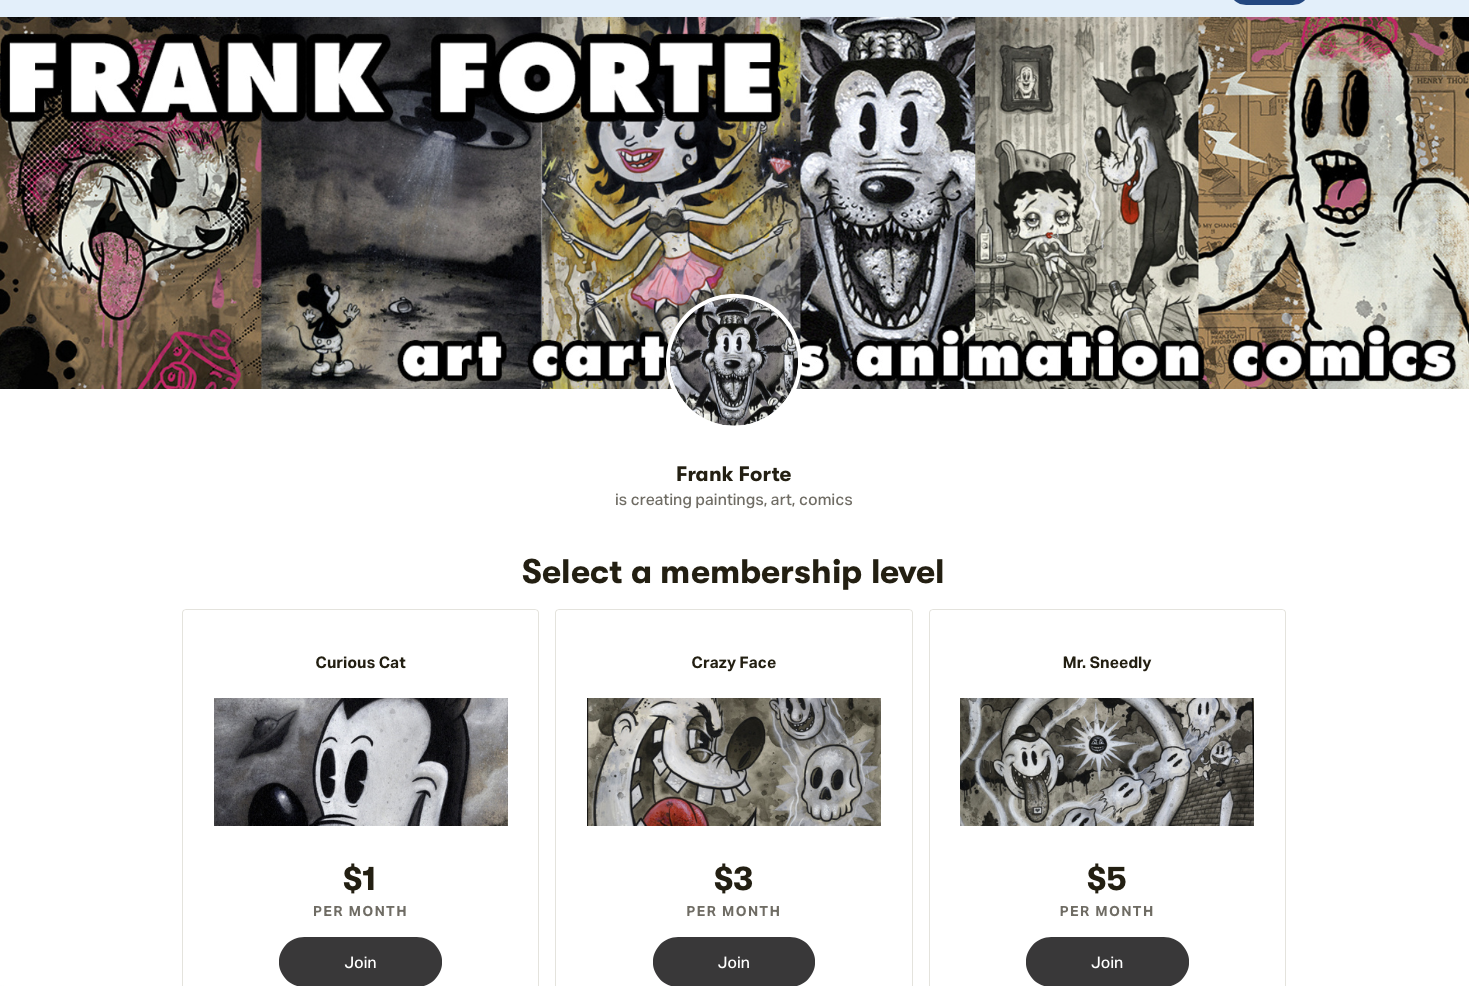 Frank Forte on Patreon